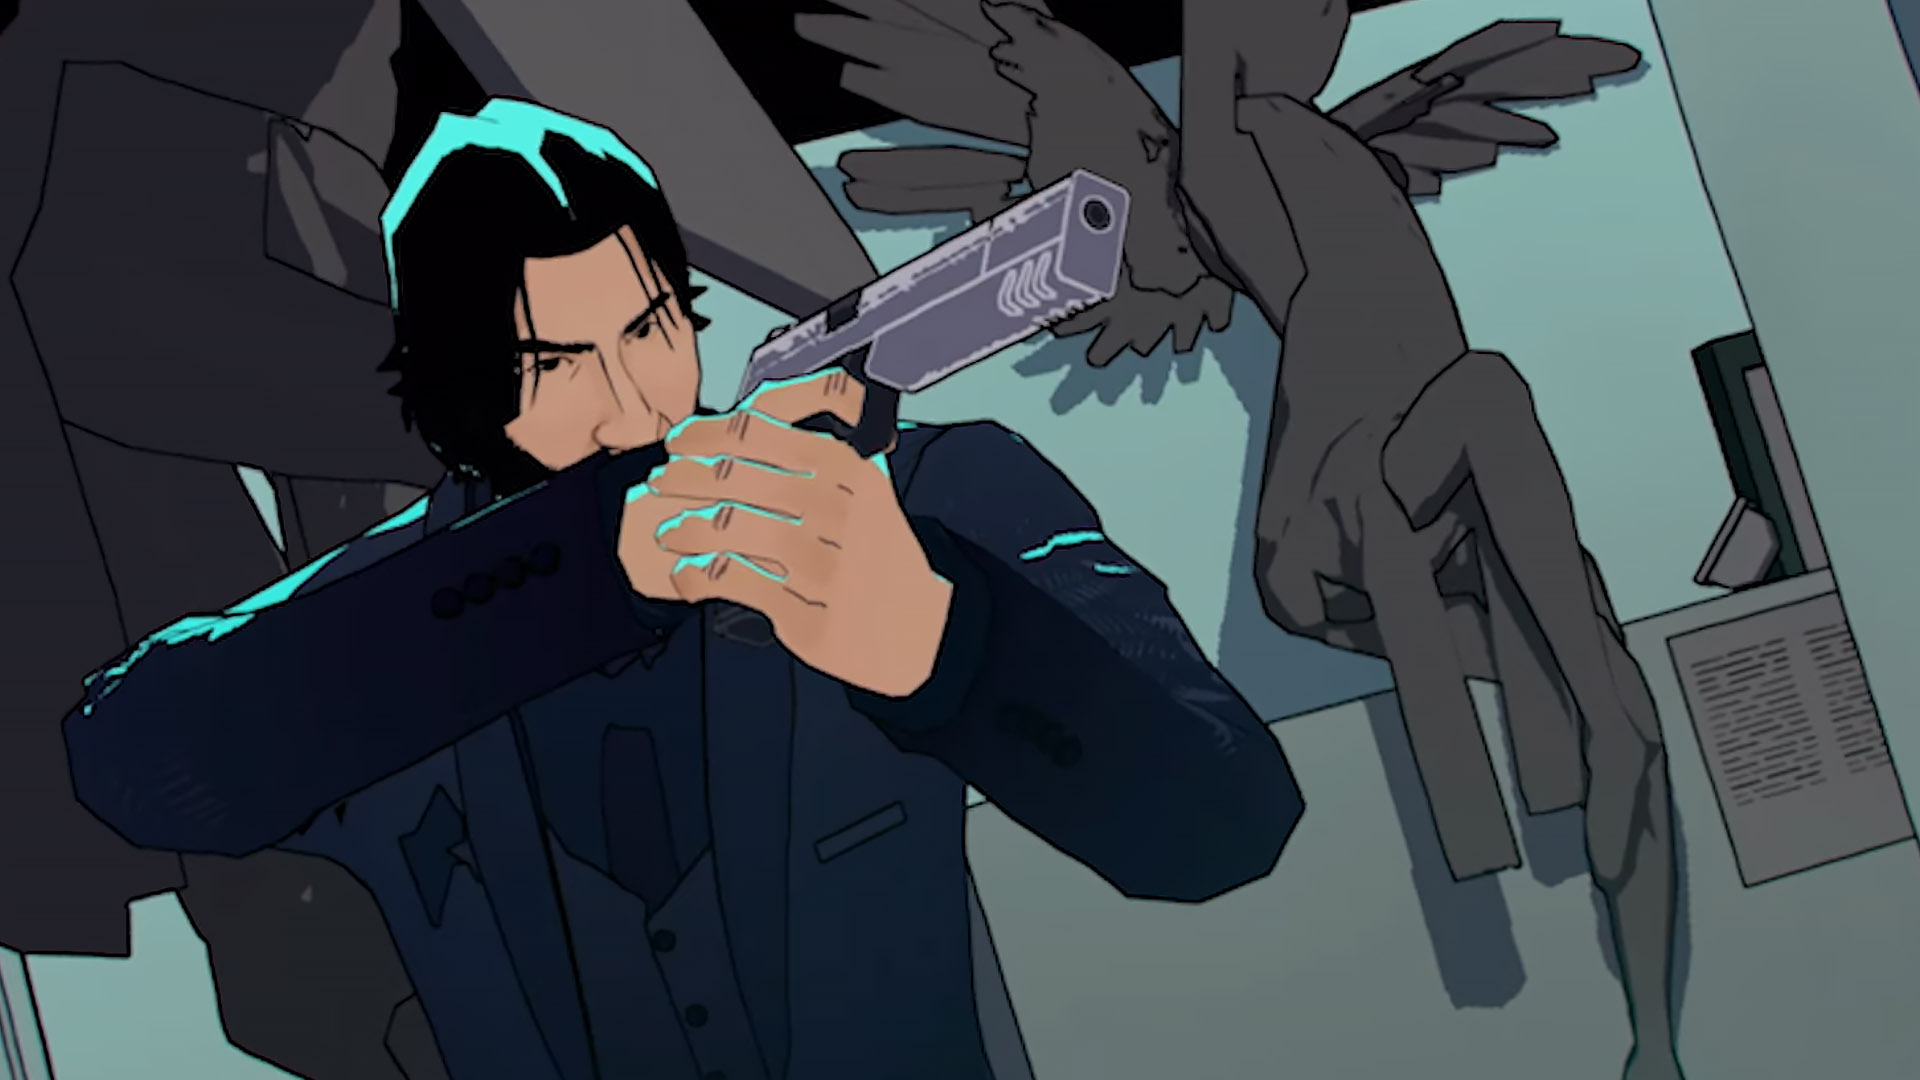 5 Things John Wick Hex Gets Wrong About The Character (& 5 Things It Nails)